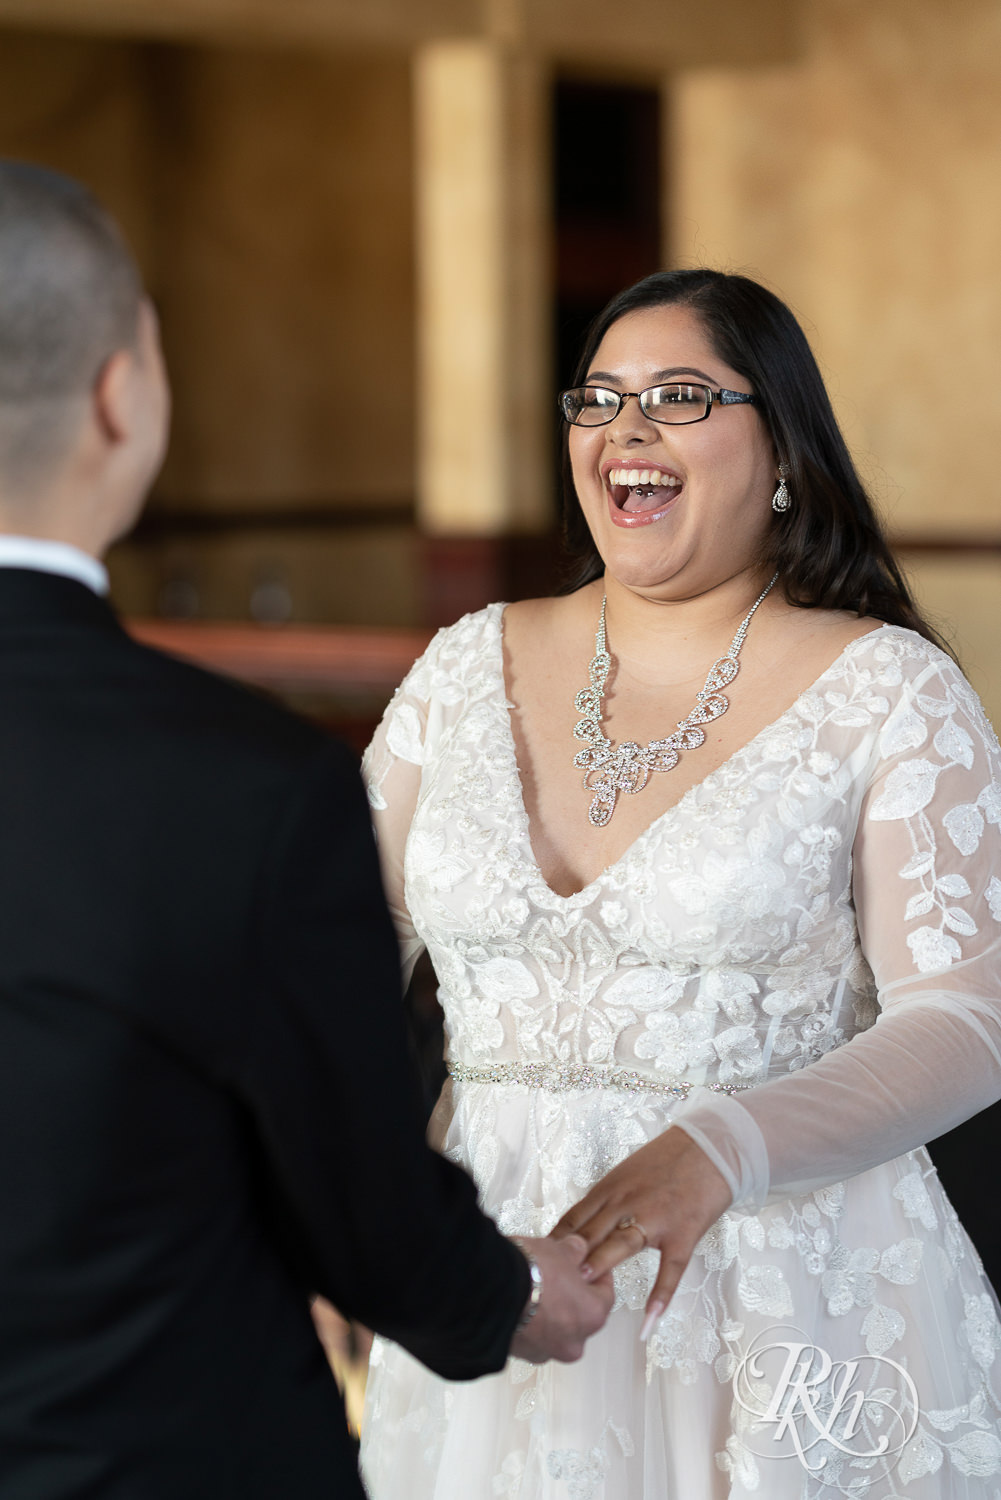 First look between bride and groom at the Historic Concord Exchange in Saint Paul, Minnesota.